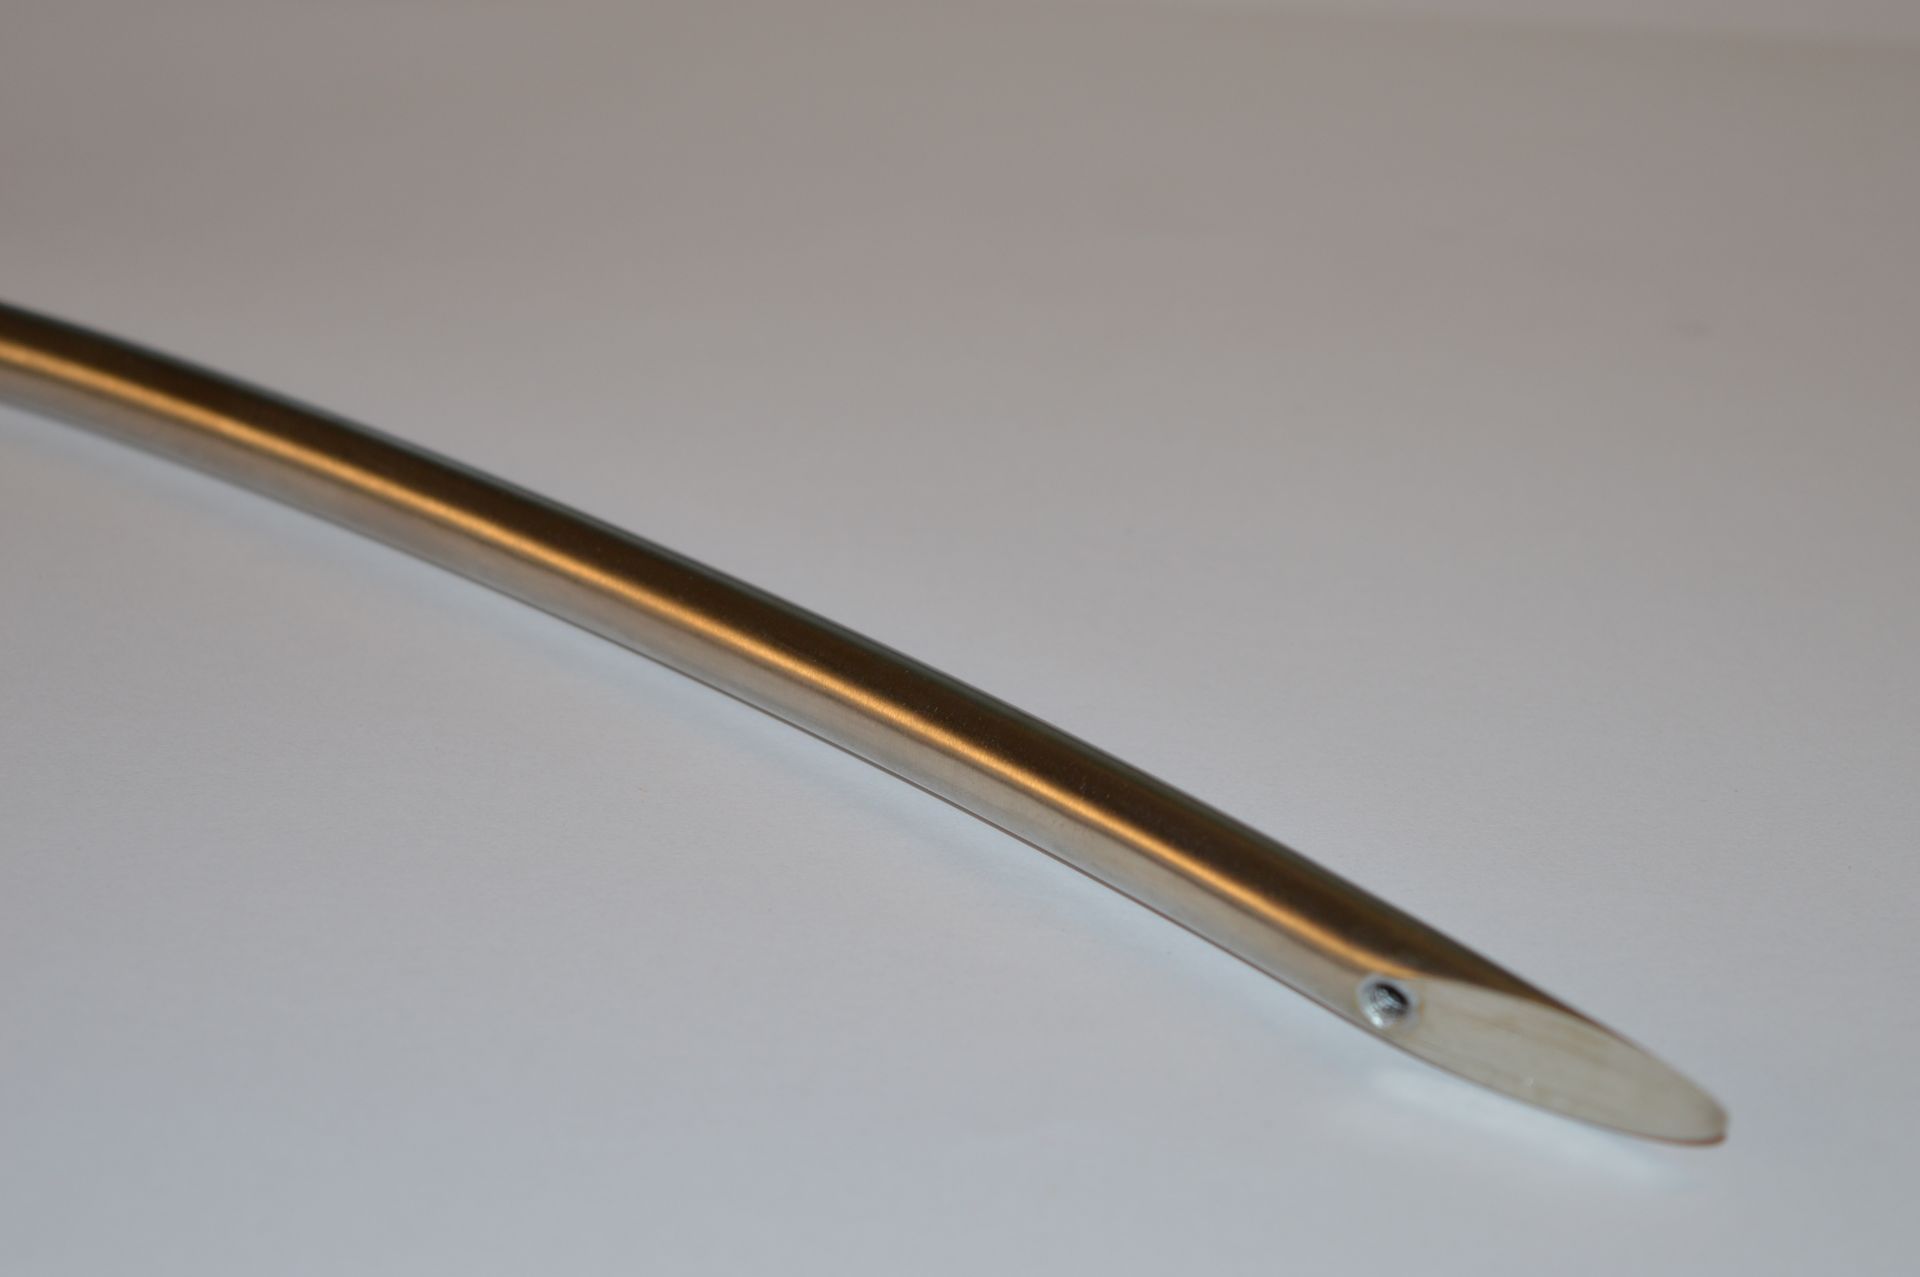 200 x Contemporary Cabinet Door Handles - Stunning Brushed Nickel Finish With Bow Design - CL003 - - Image 6 of 6